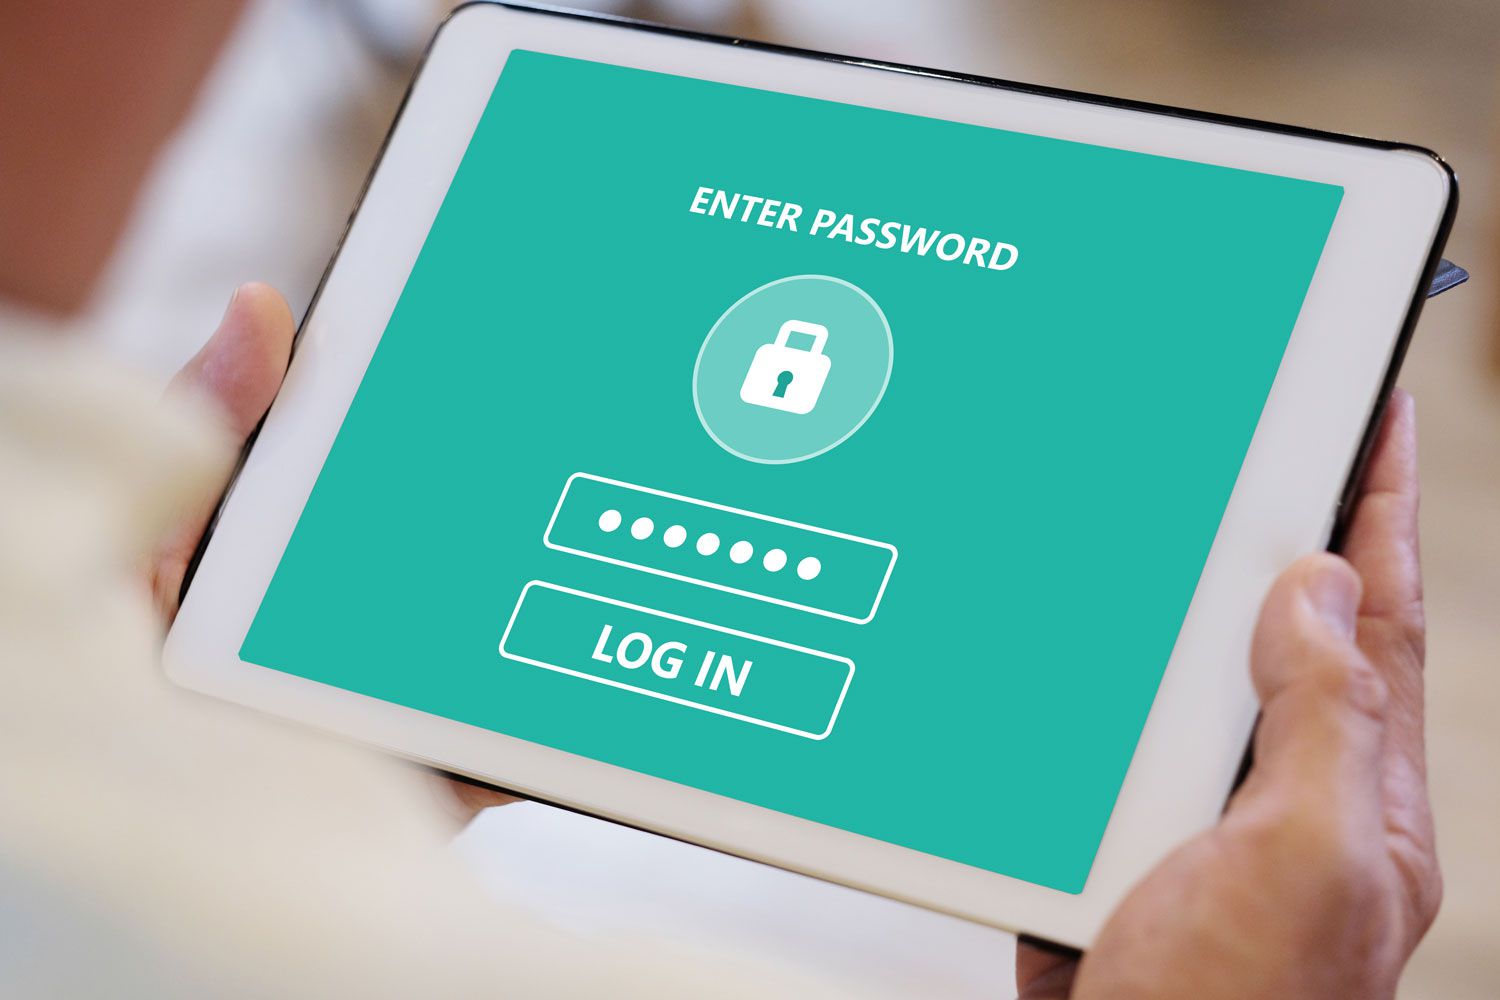 How To Get Into Android Tablet Forgot Password